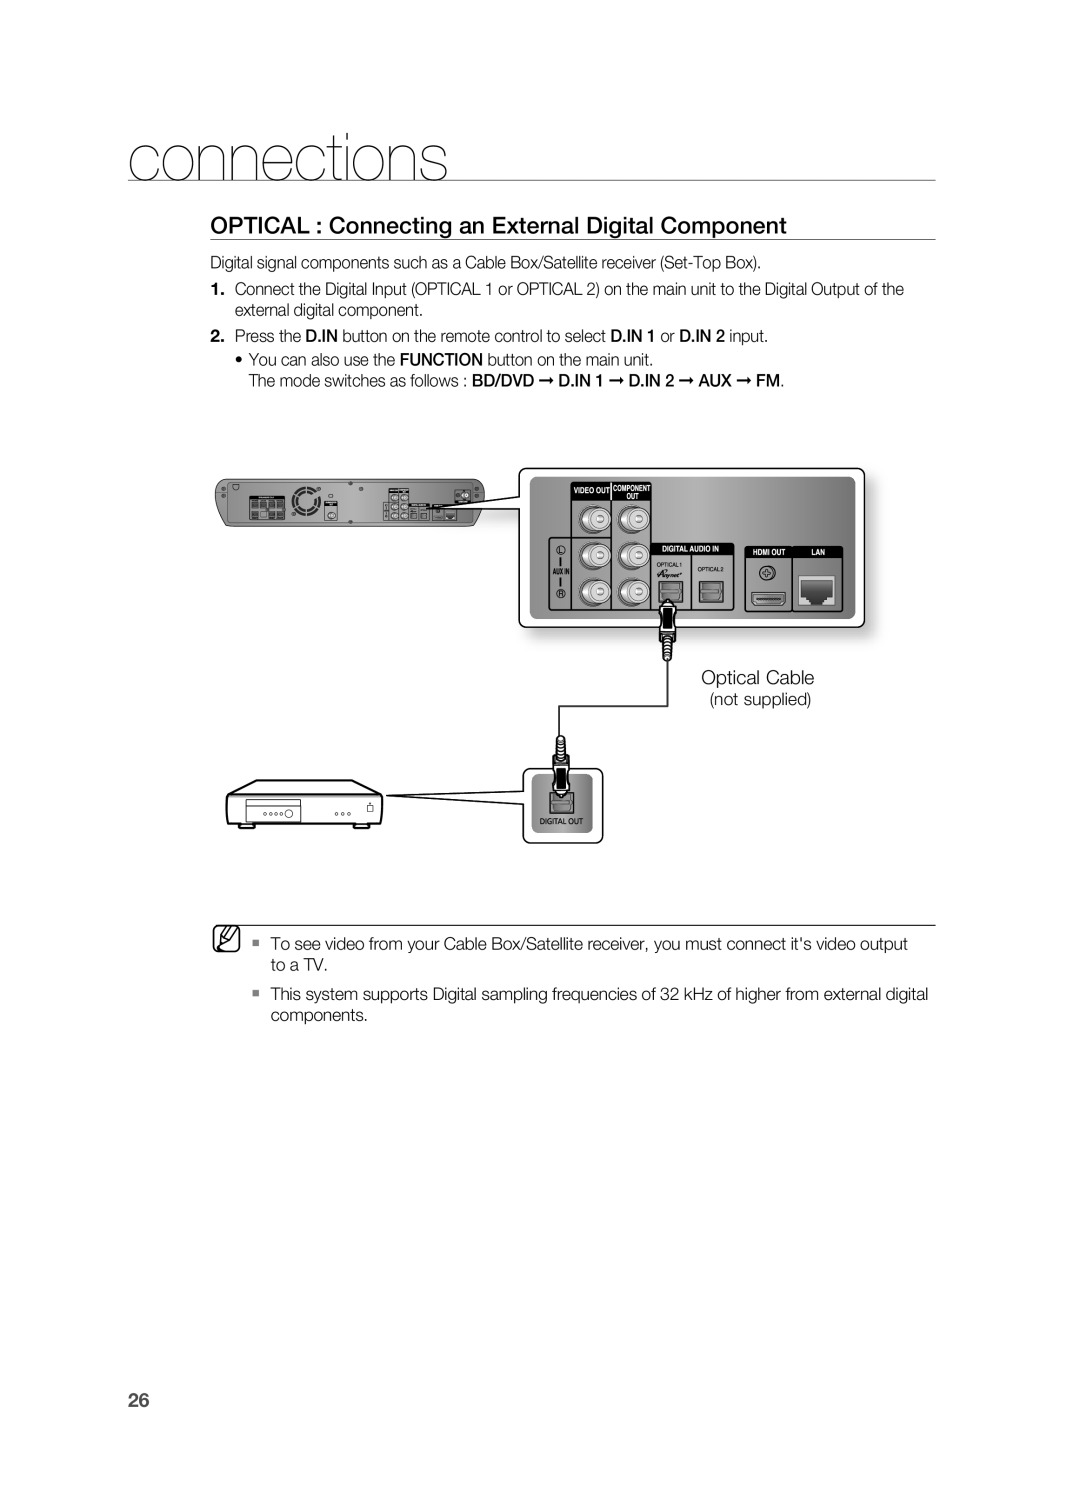 Samsung HT-BD2S manual connections, Optical Cable 